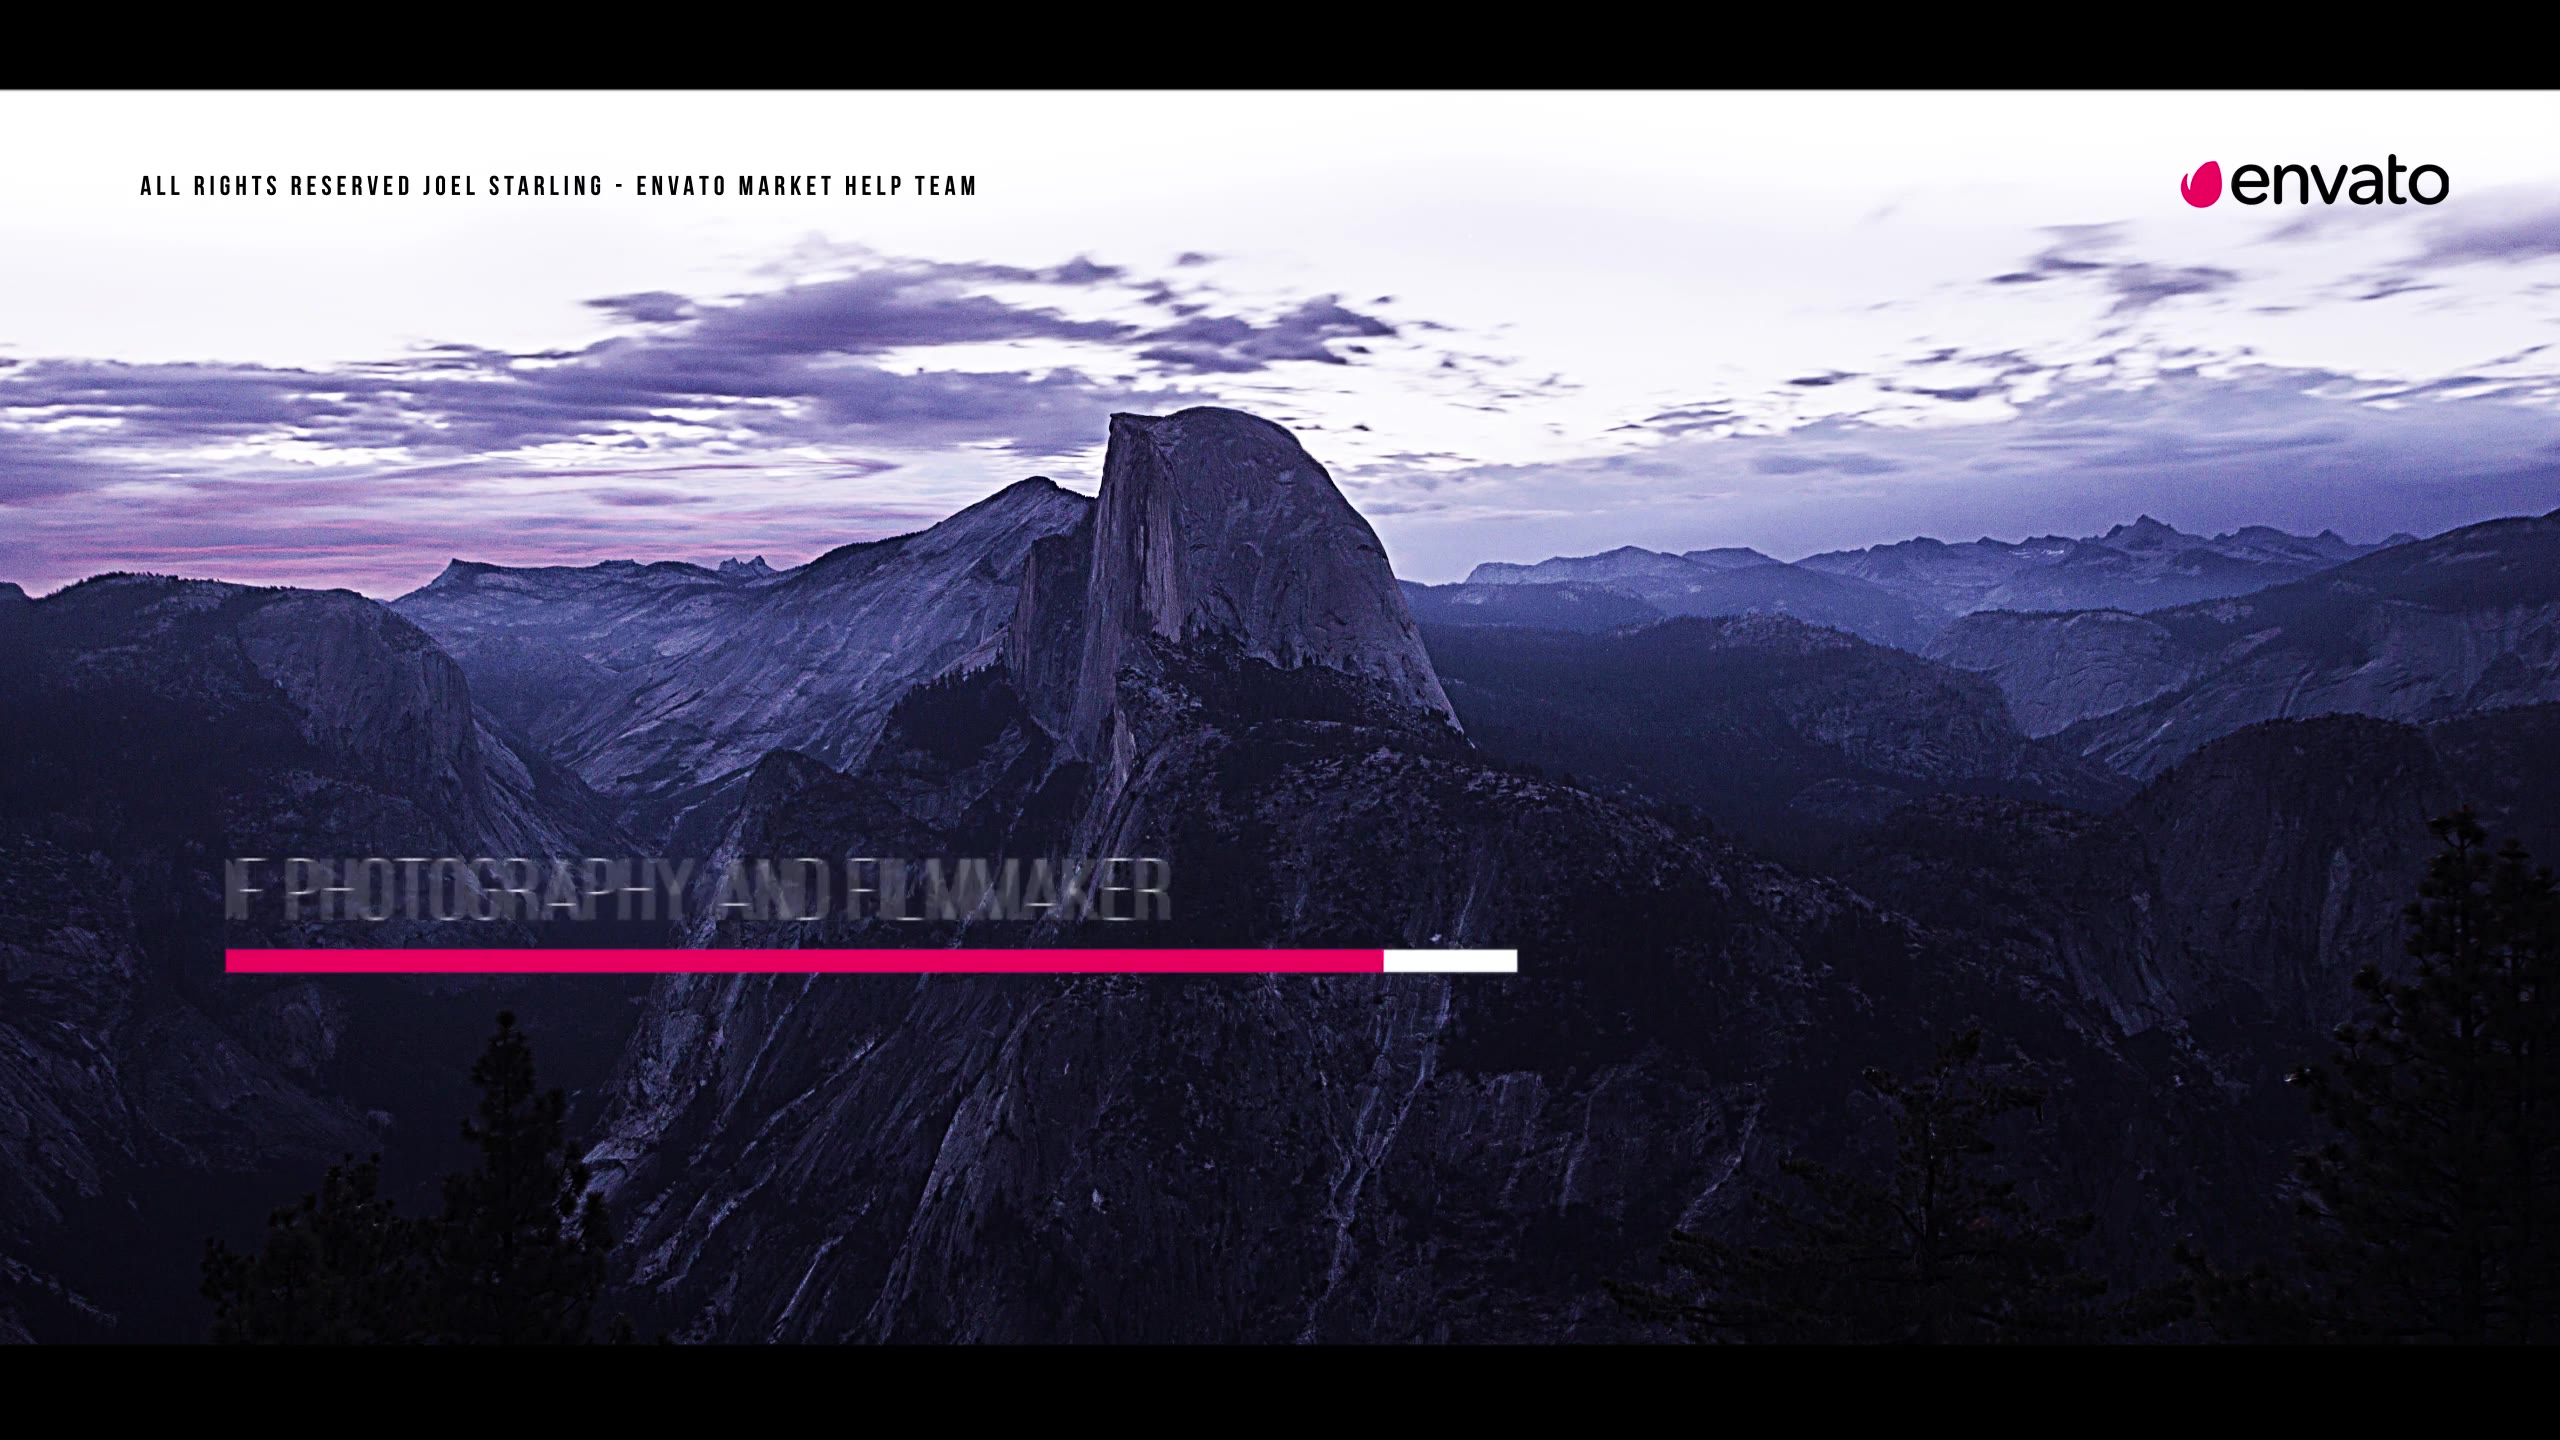 Elegant Lower Thirds for Premiere - Download Videohive 21739374